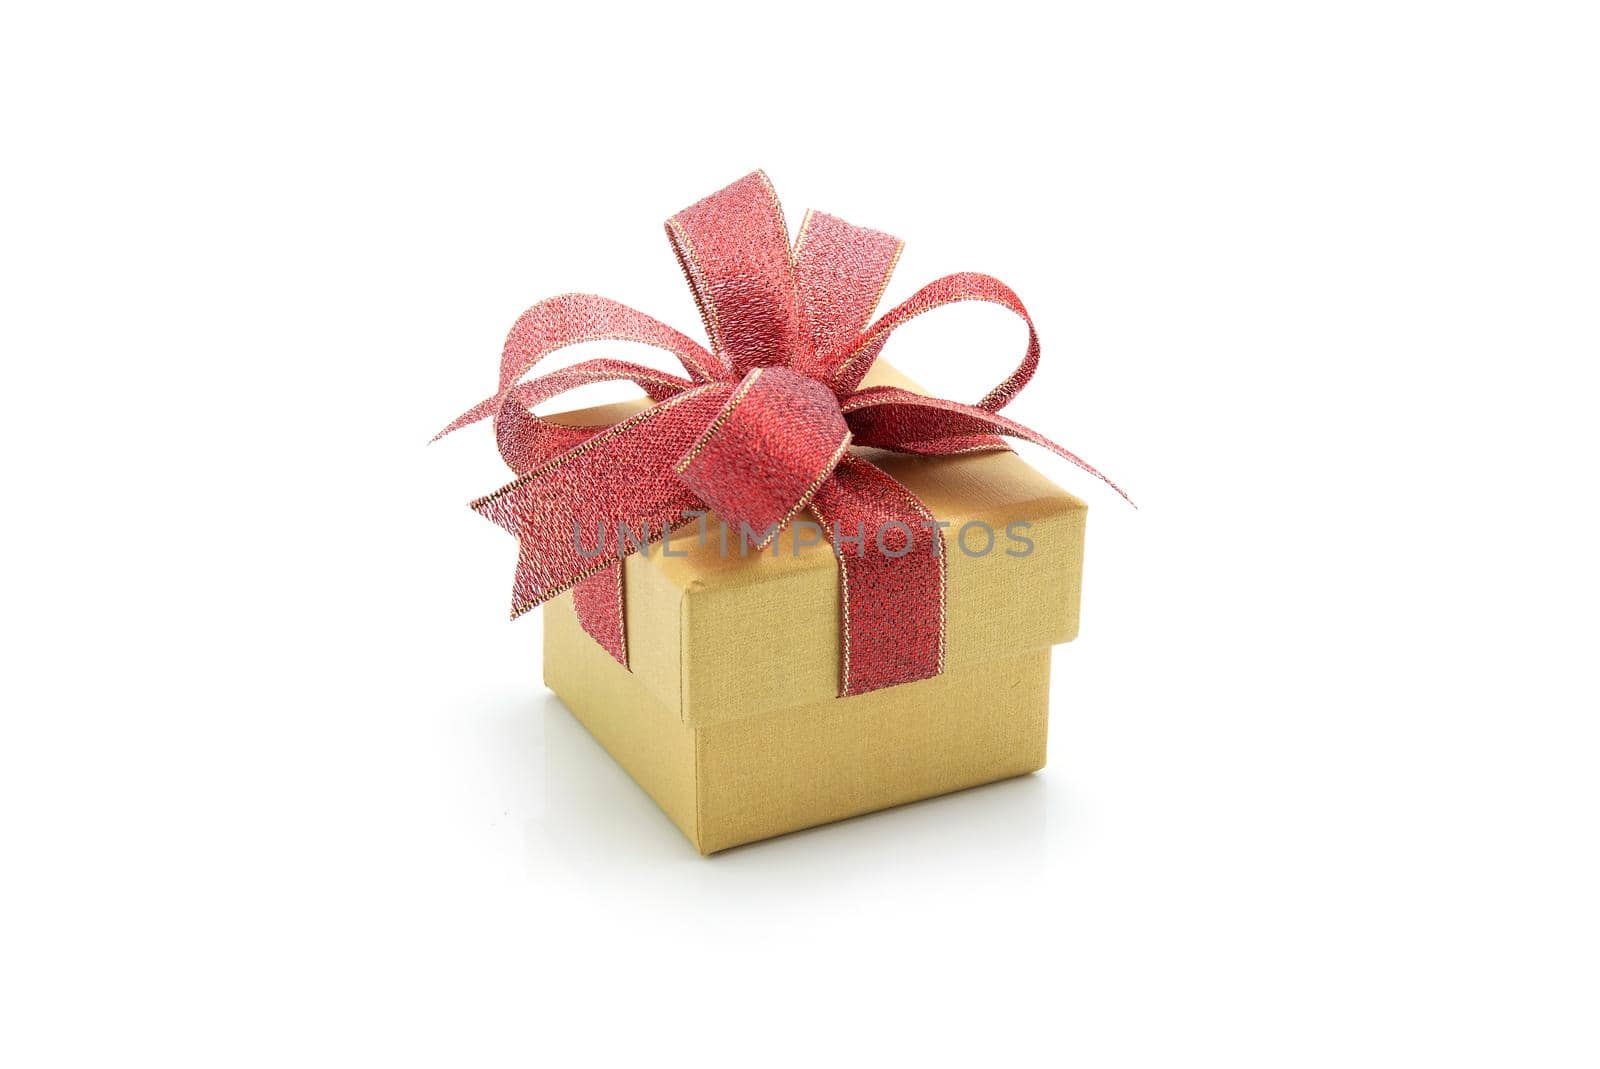 Gold gift box and ribbon isolated on white background, presents in valentine day or Christmas day, object in birthday or anniversary, package with wrap luxury, holiday and festive concept.